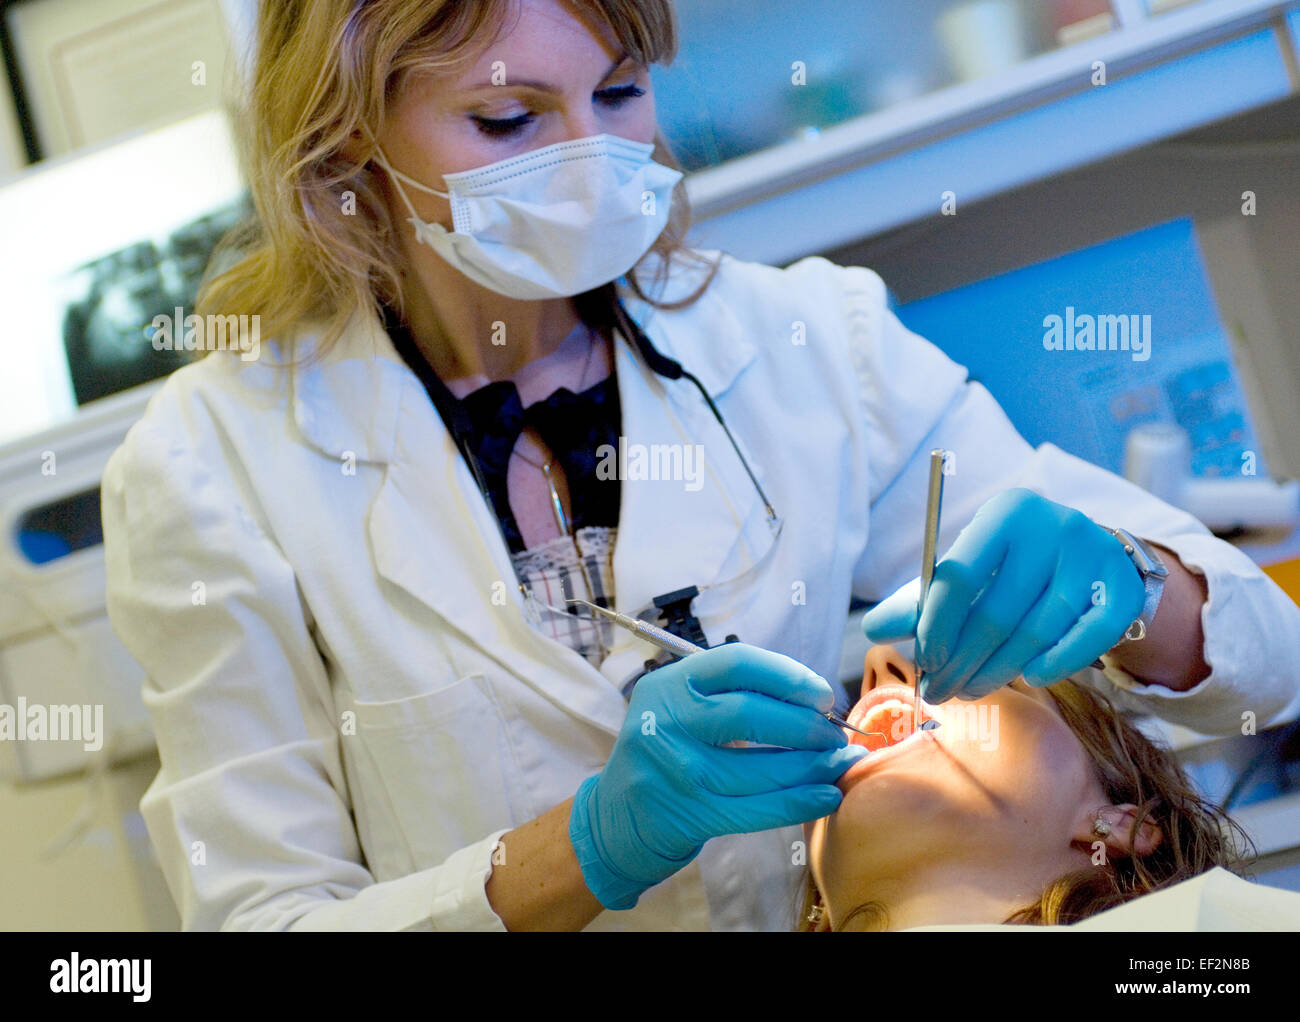 Dentist with a patient Stock Photo